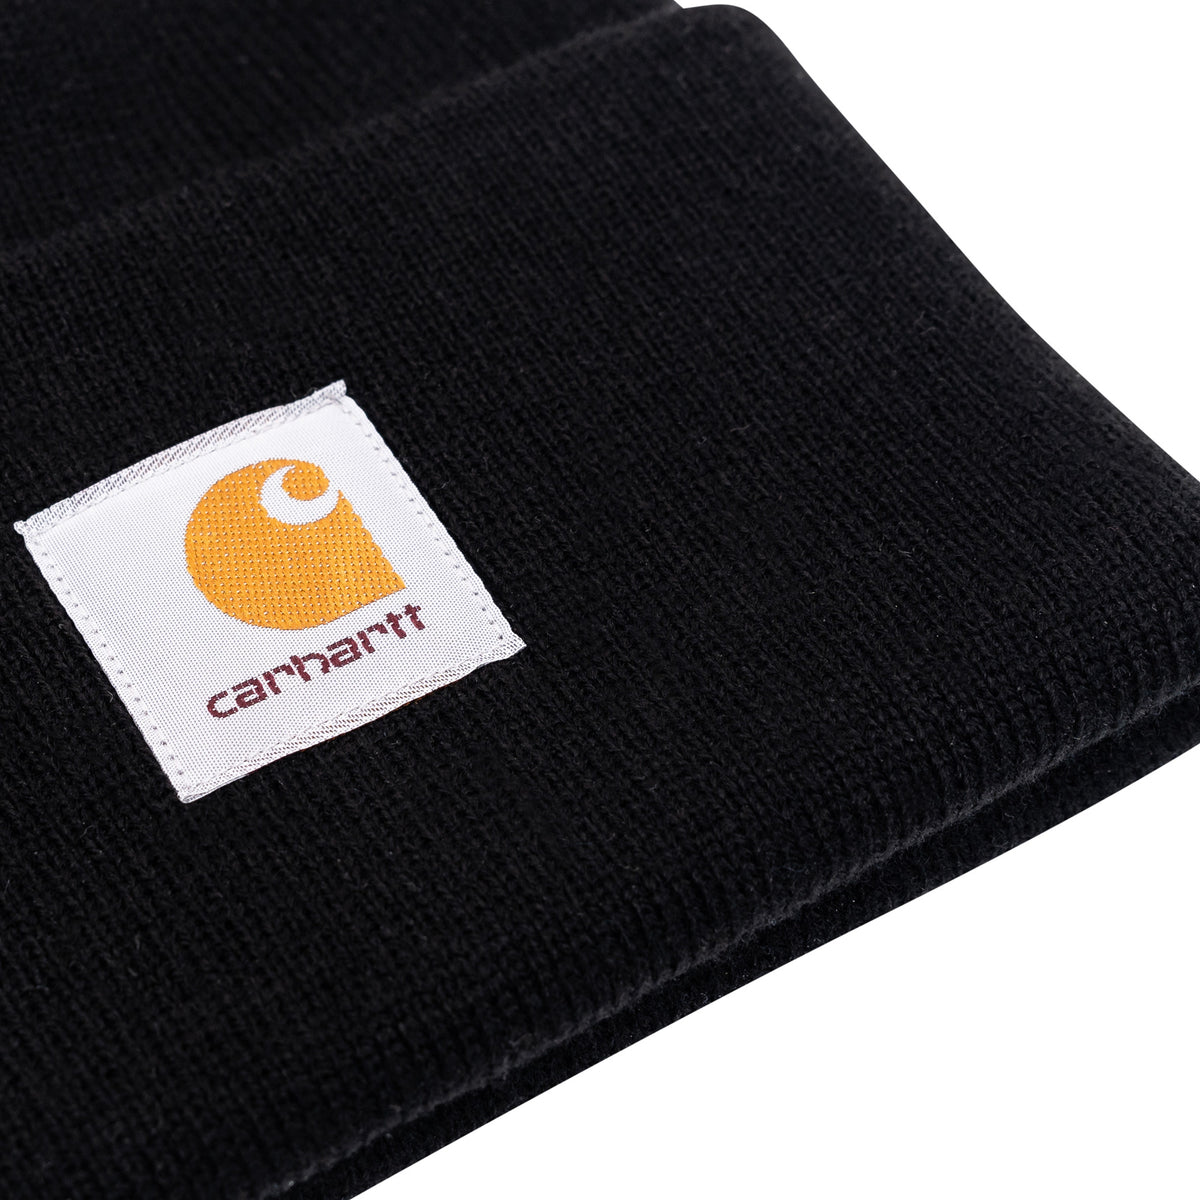 Load image into Gallery viewer, CARHARTT WIP Black Acrylic Watch Beanie
